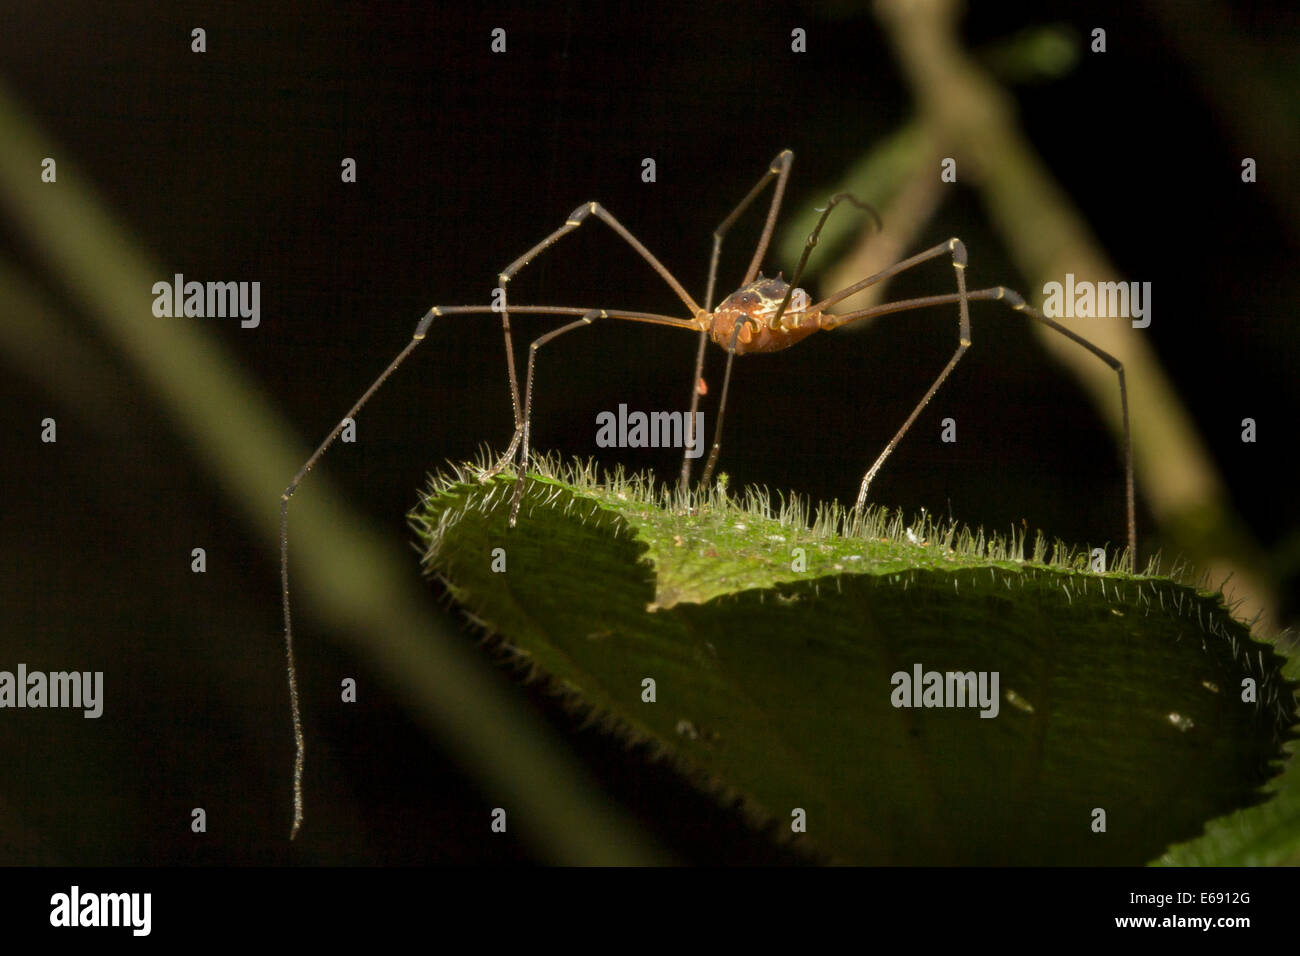 A tropical harvestman (order Opiliones). Stock Photo